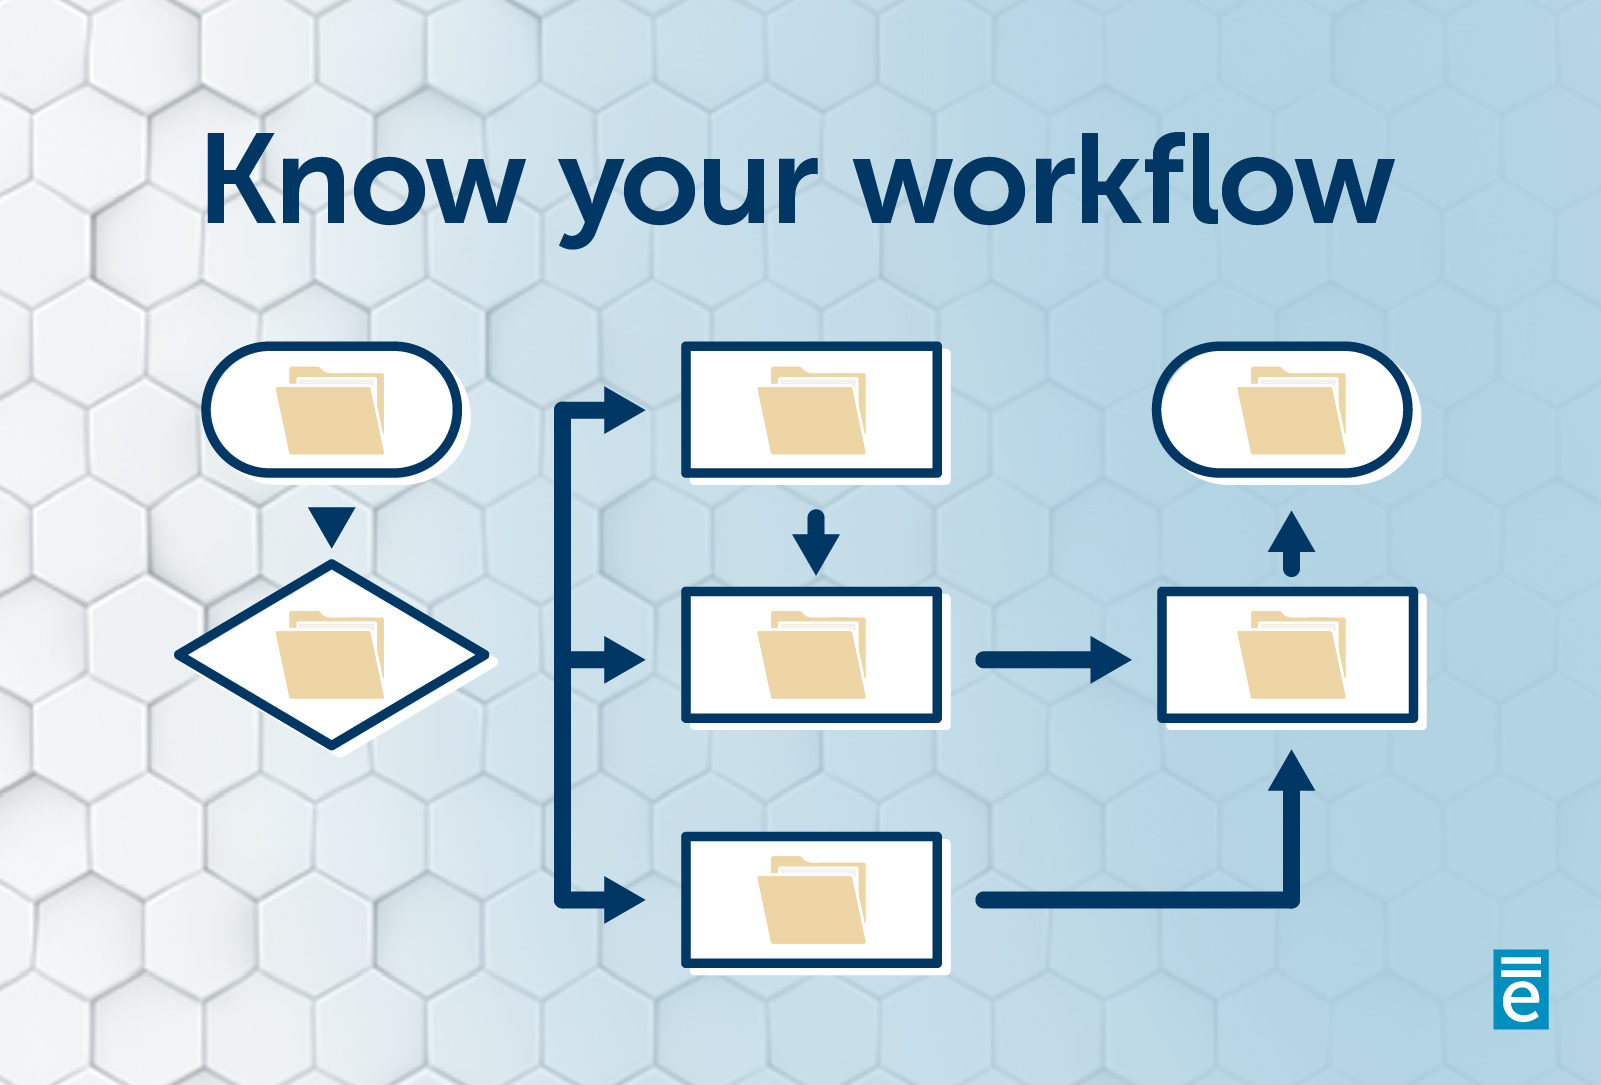 Know your workflow